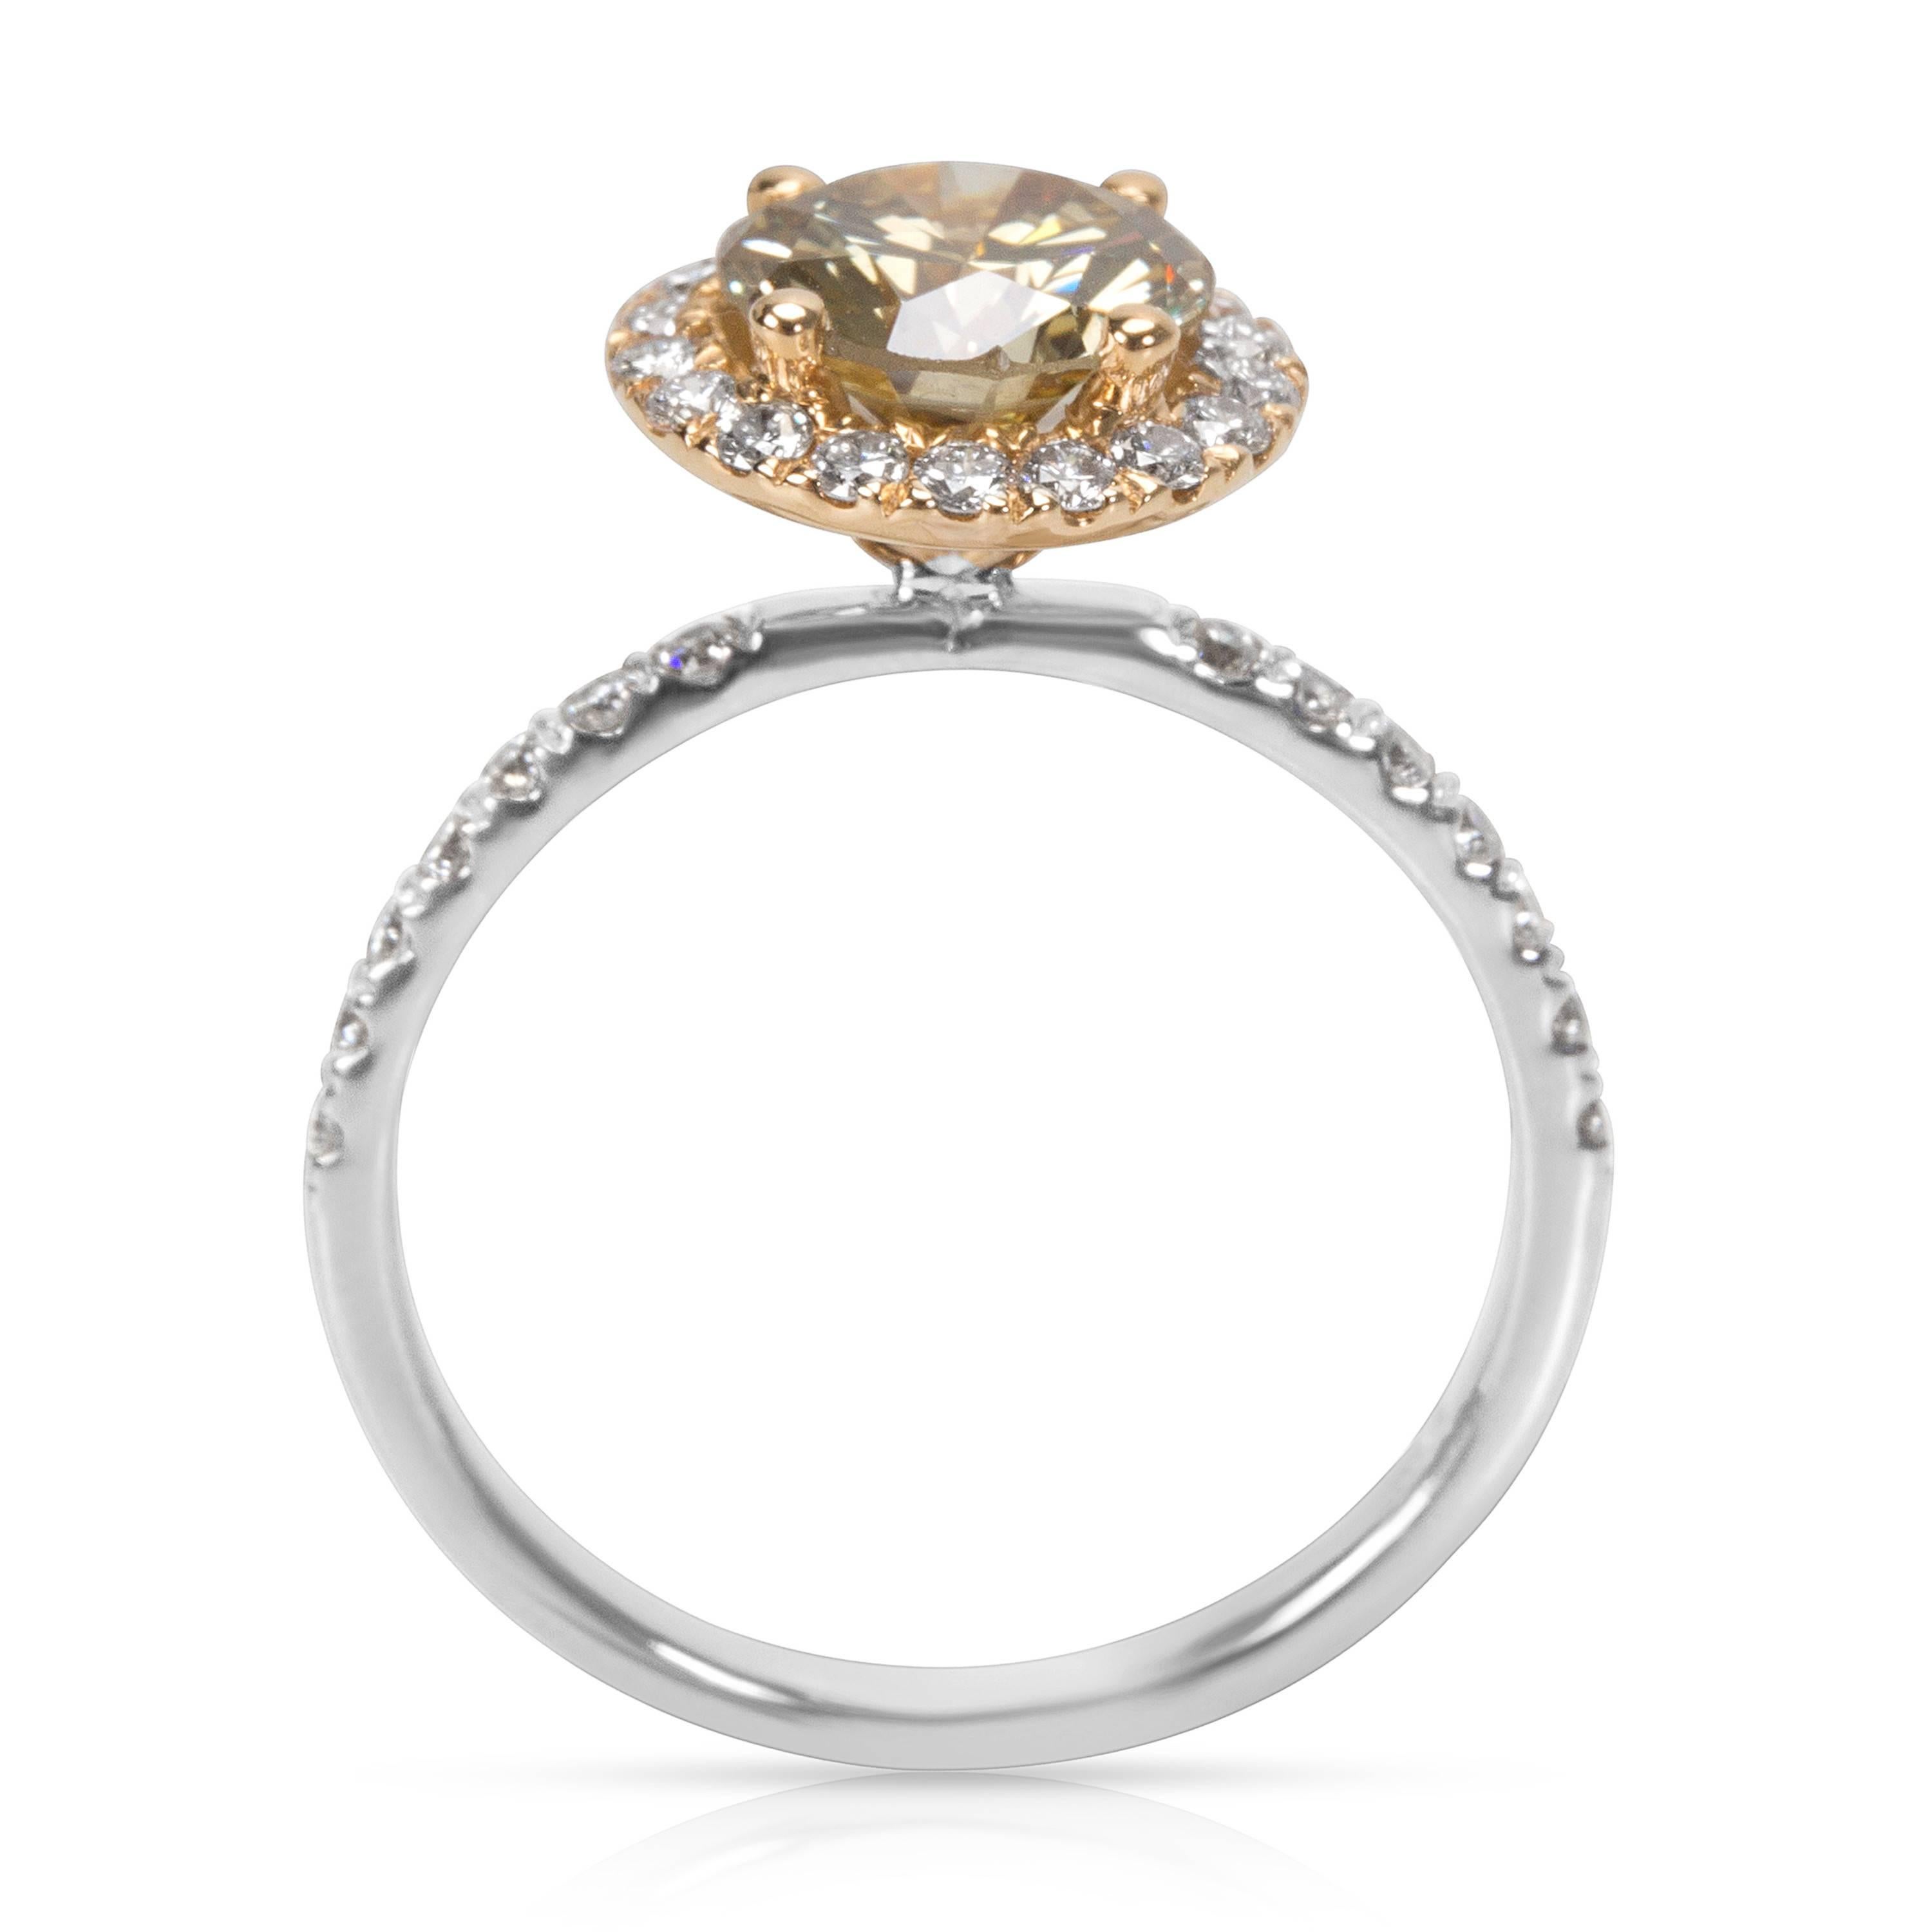 Round Cut GIA Certified Brownish Yellow Diamond Engagement Ring in 14KT Gold 2.08 Carat